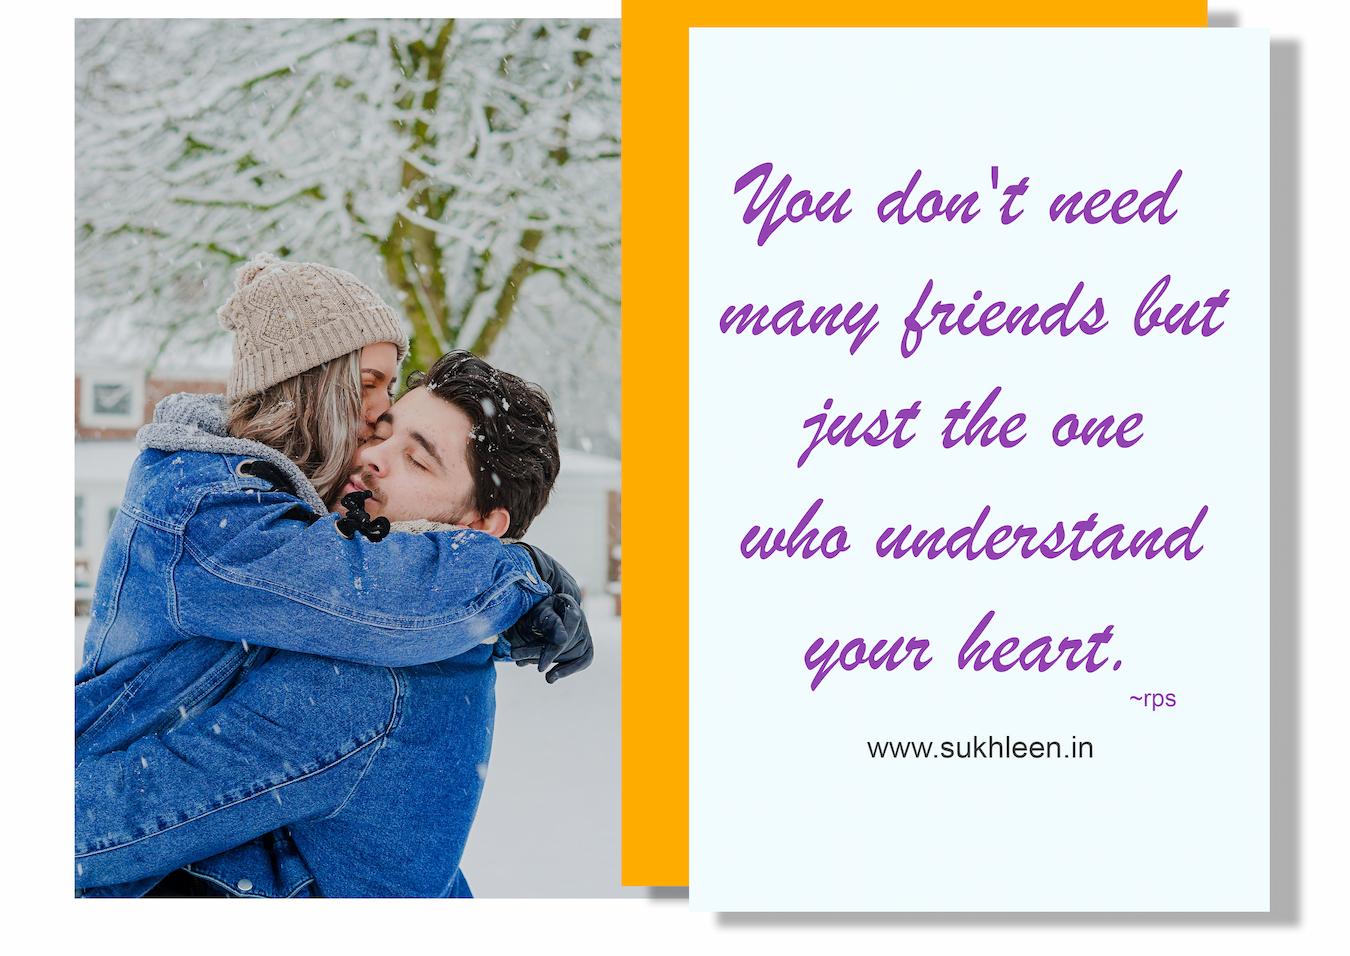 You don't need many friends but just the one who understand your heart. Love relationship Quotes